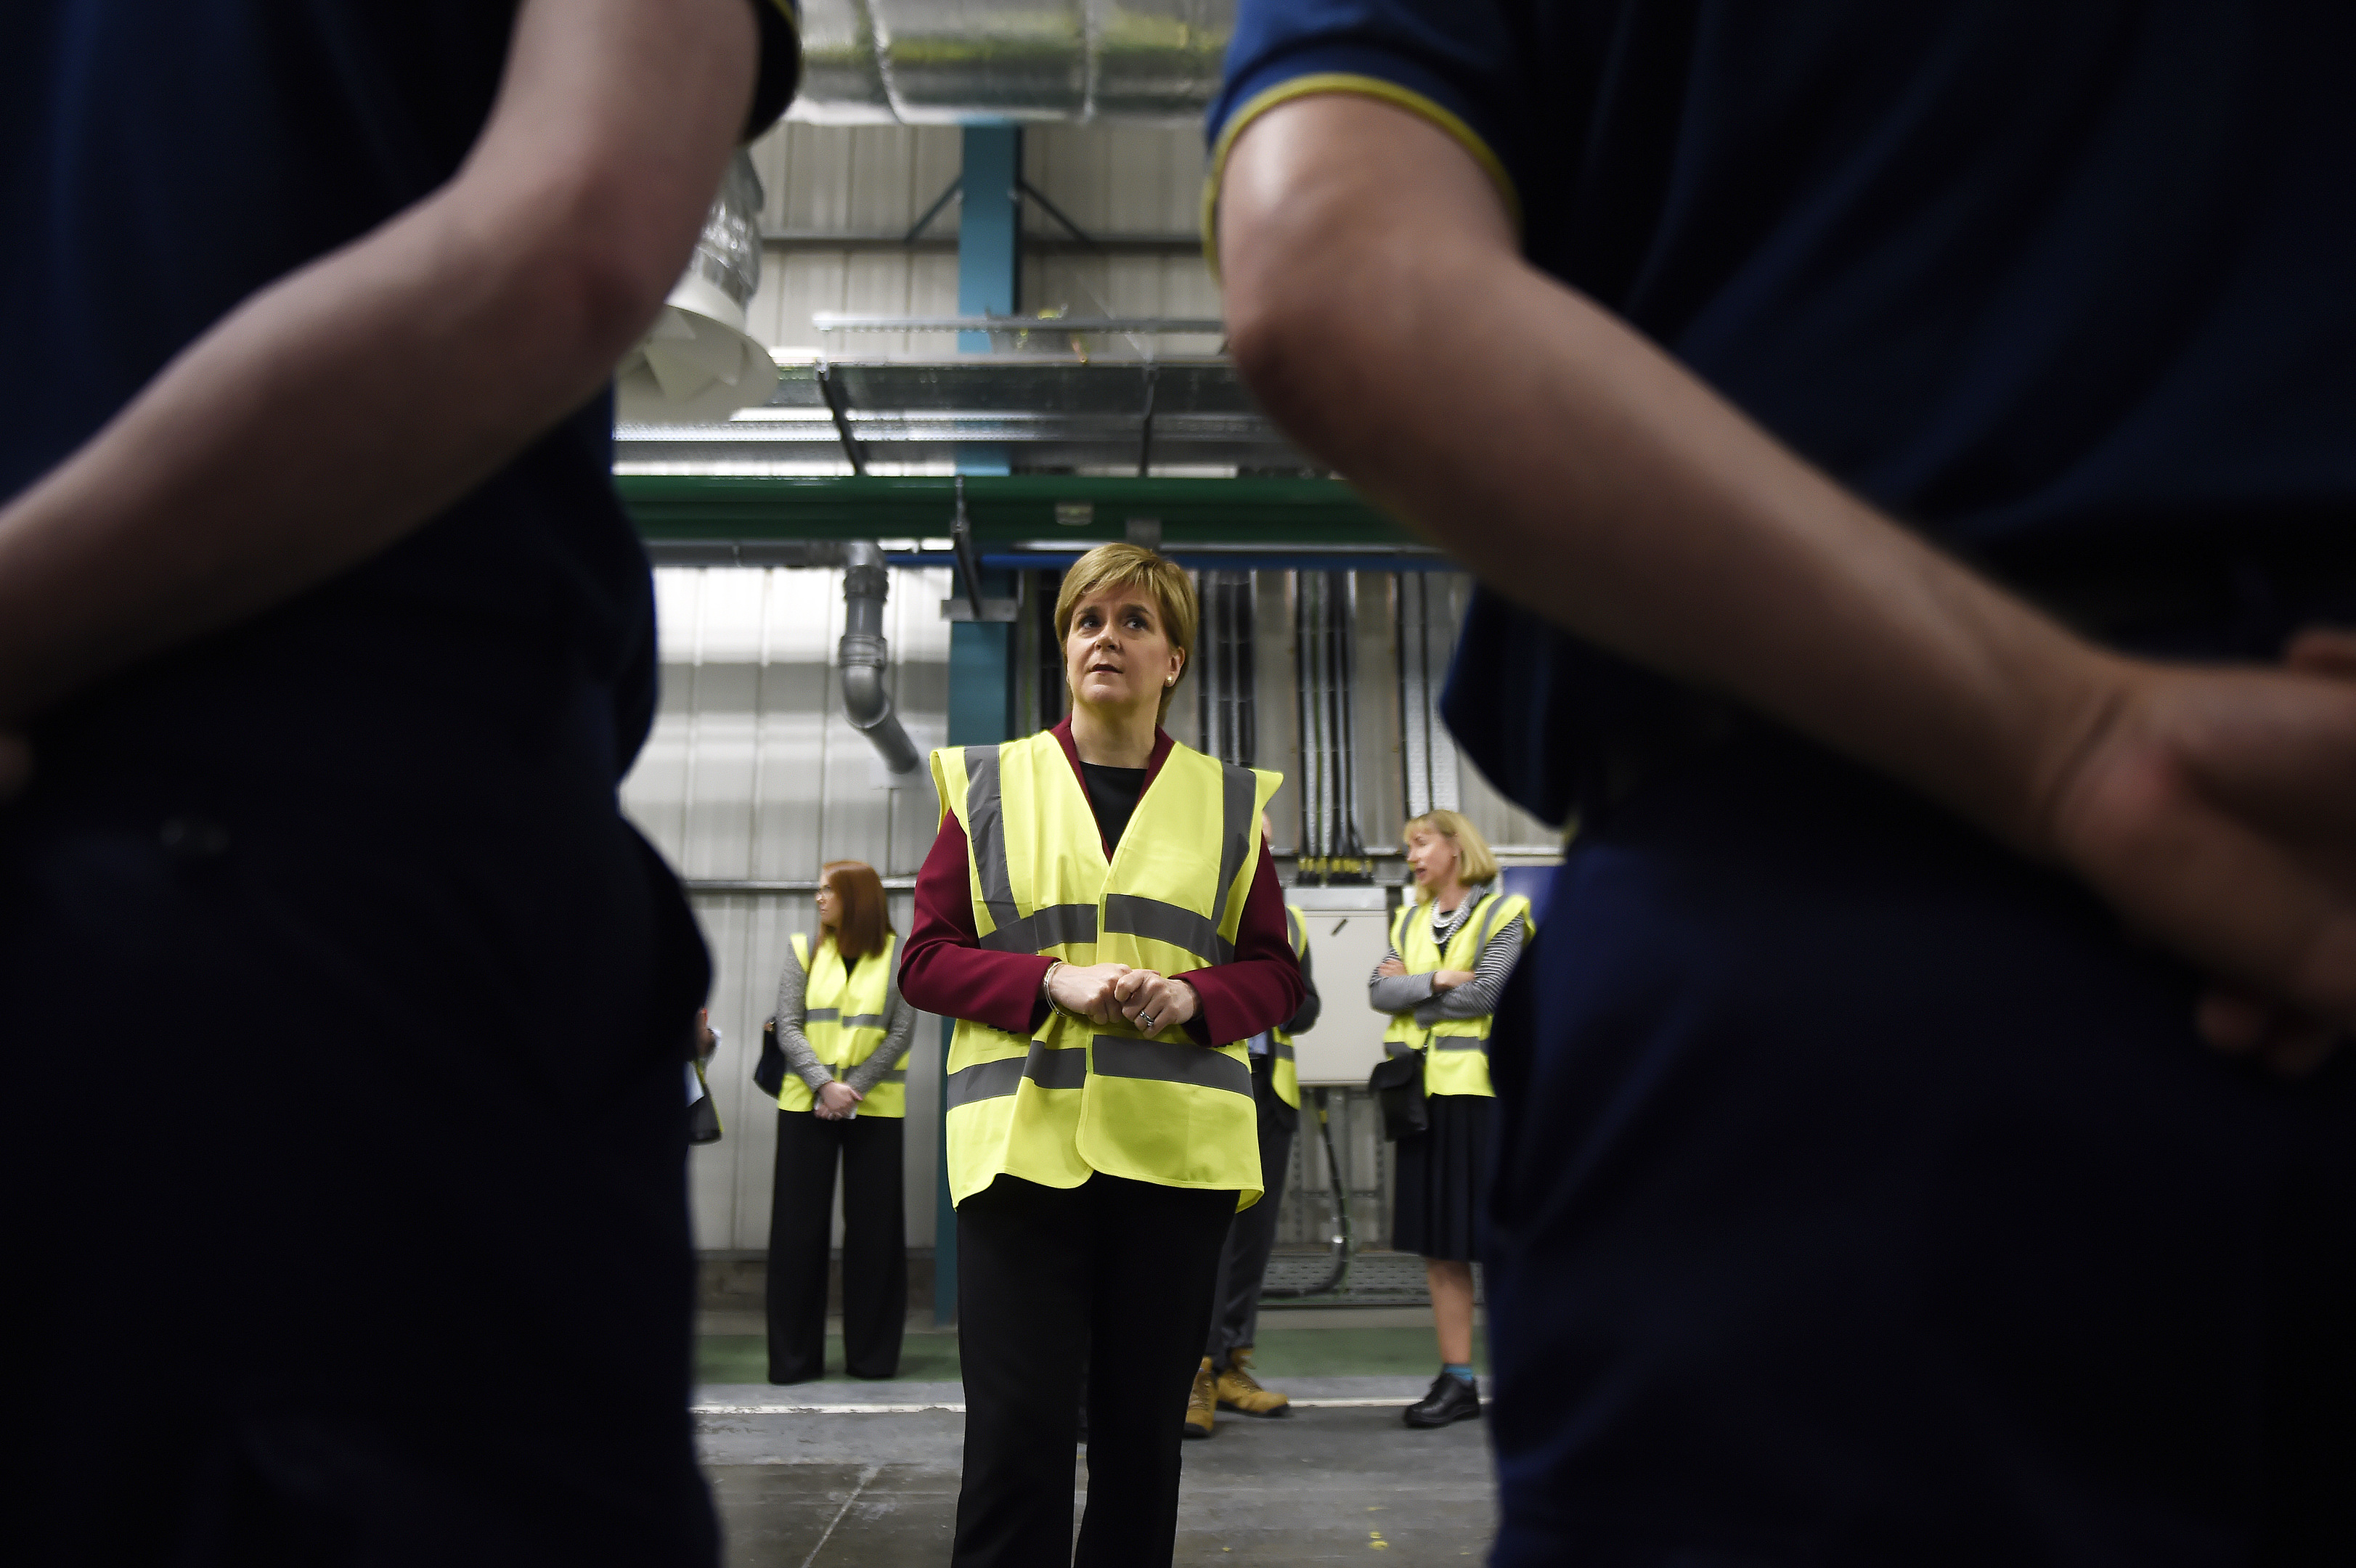 Nicola Sturgeon has said her government will help those affected by the job cuts to find alternative employment.